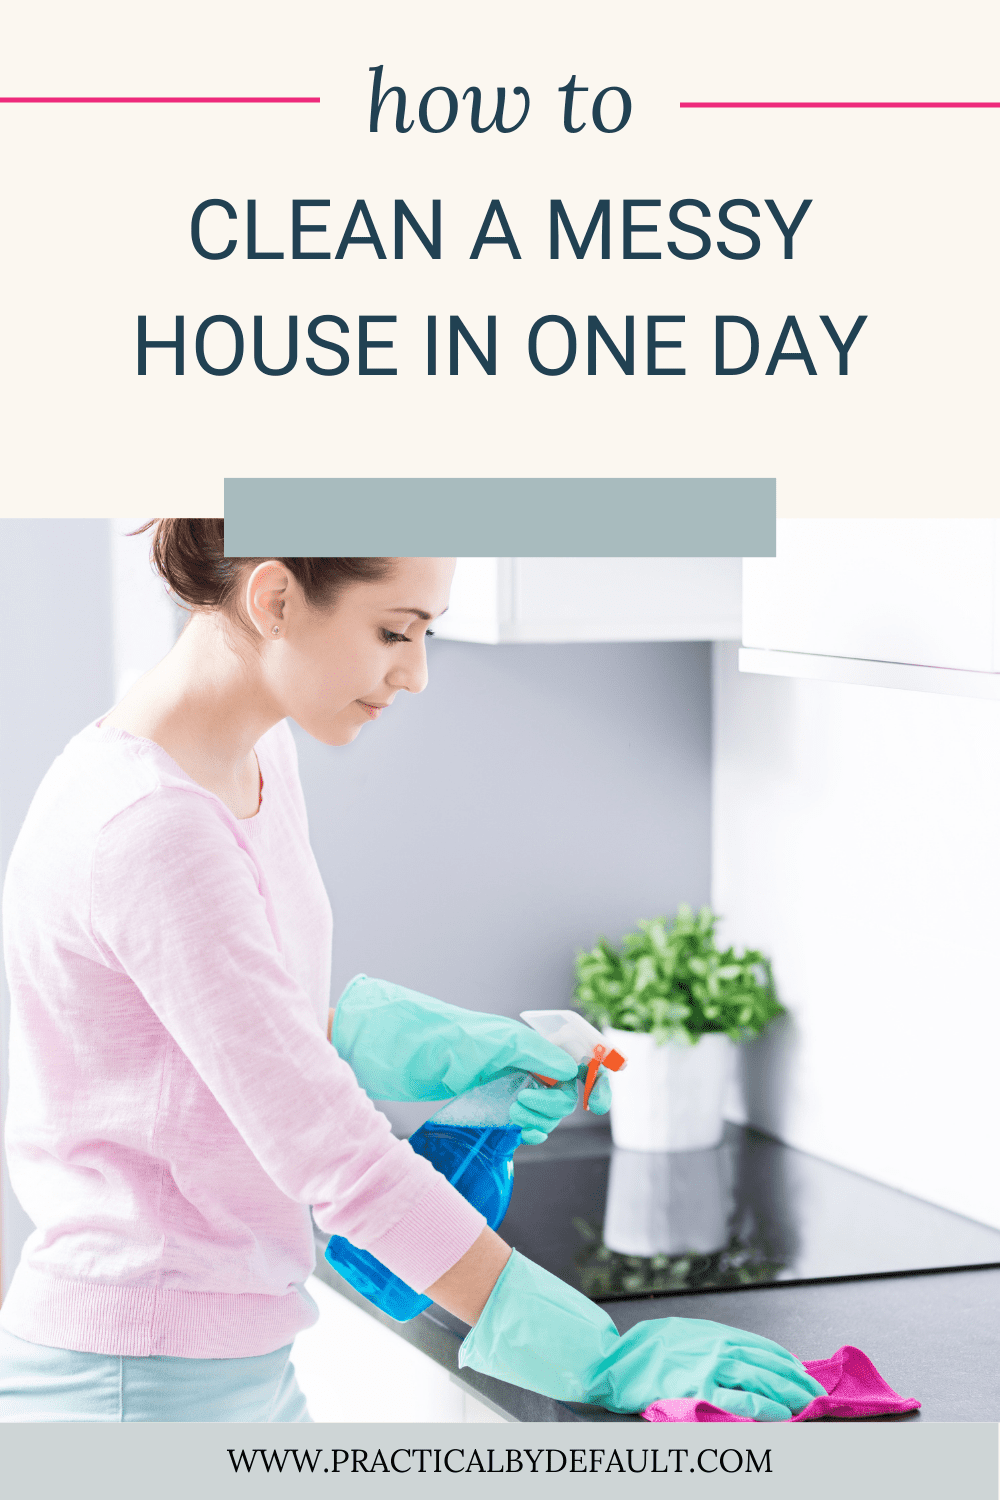 How To Clean A Messy House In One Day